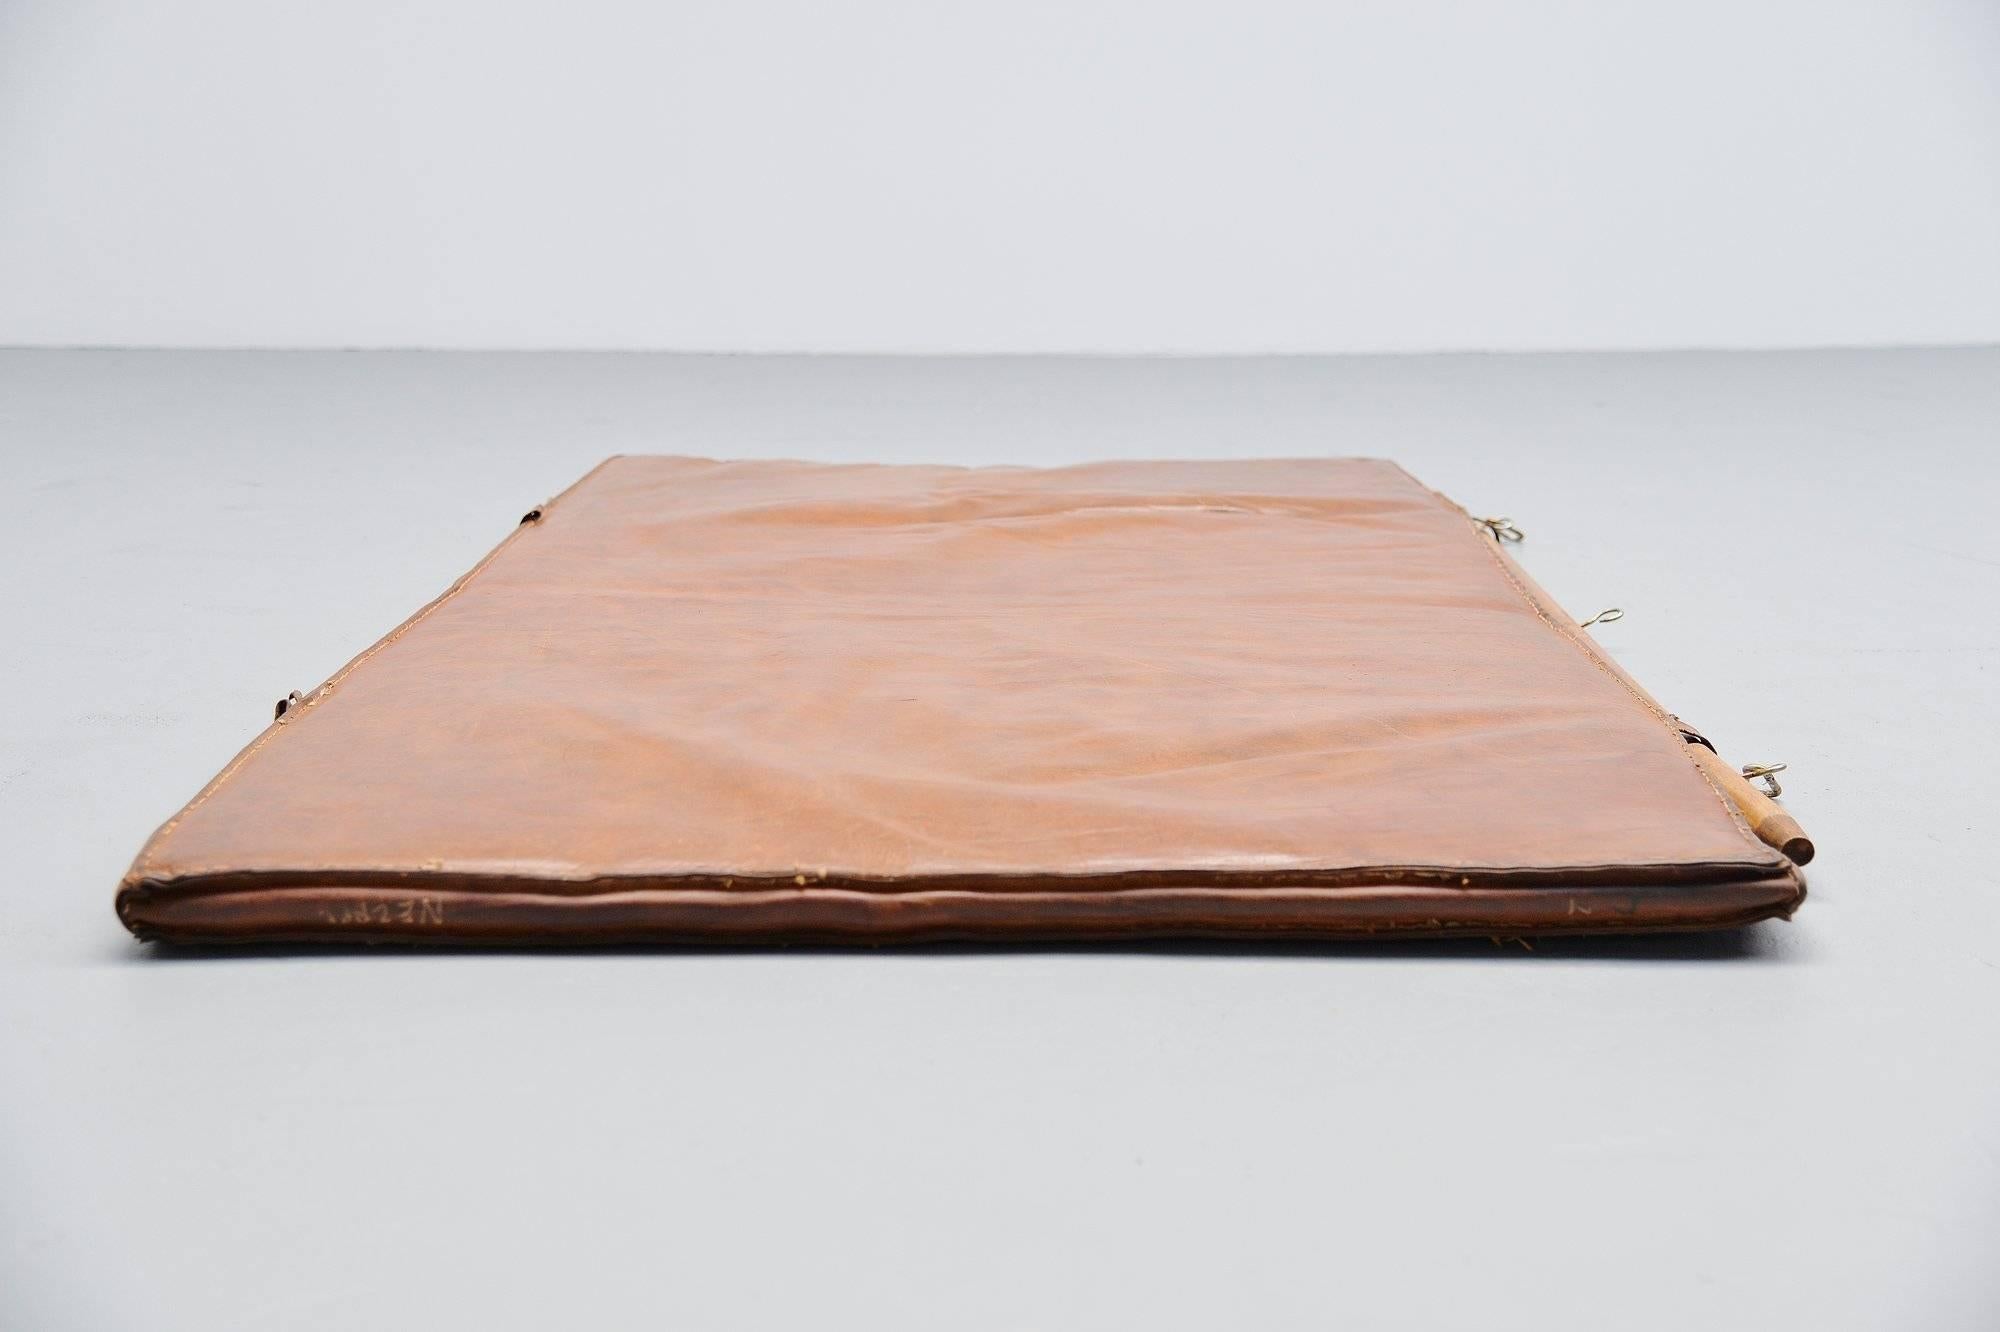 Highly decorative gymnastics mat made in Holland, 1960. This mat was made of cognac buffalo leather, stitched. This can also be wall hung using the wooden stick that was mounted (not original). Very nice an decorative piece of industrial design. In